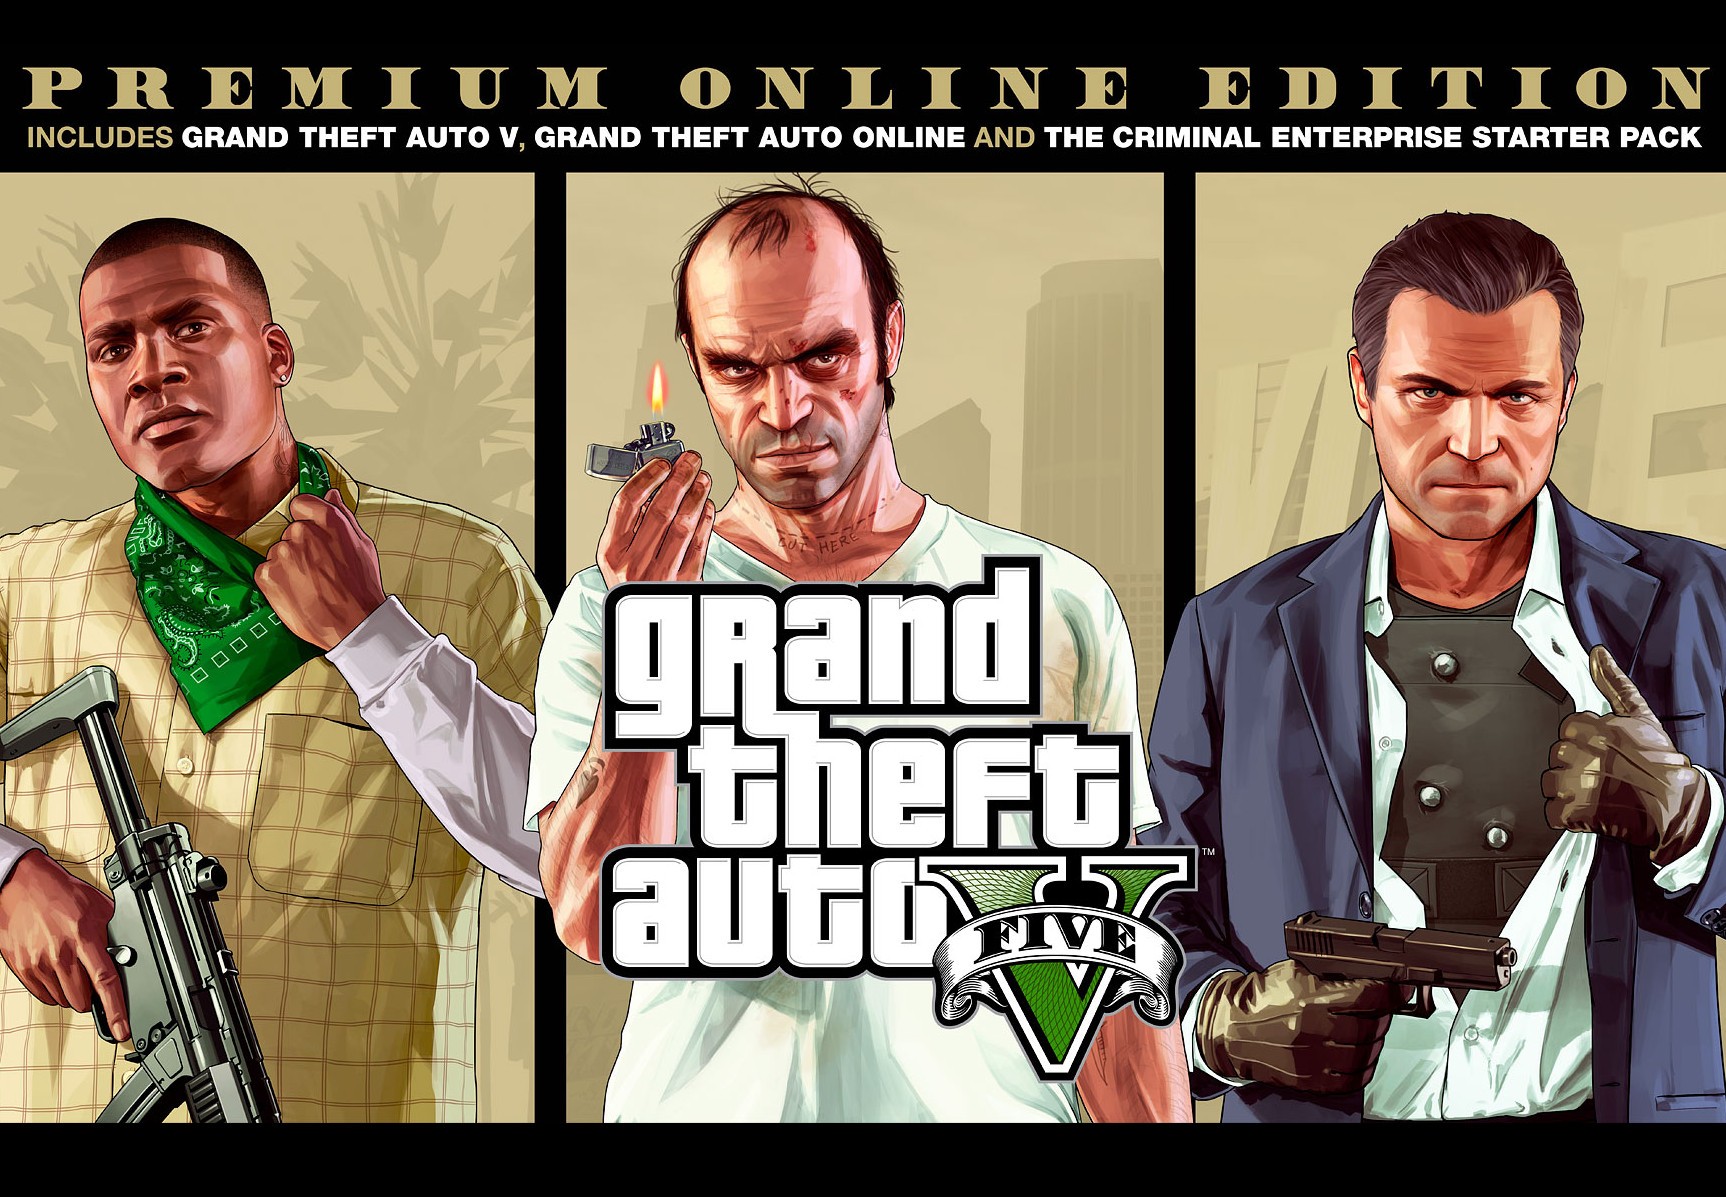 Grand Theft Auto V: Premium Online Edition & Great White Shark Card Bundle PlayStation 4 Account